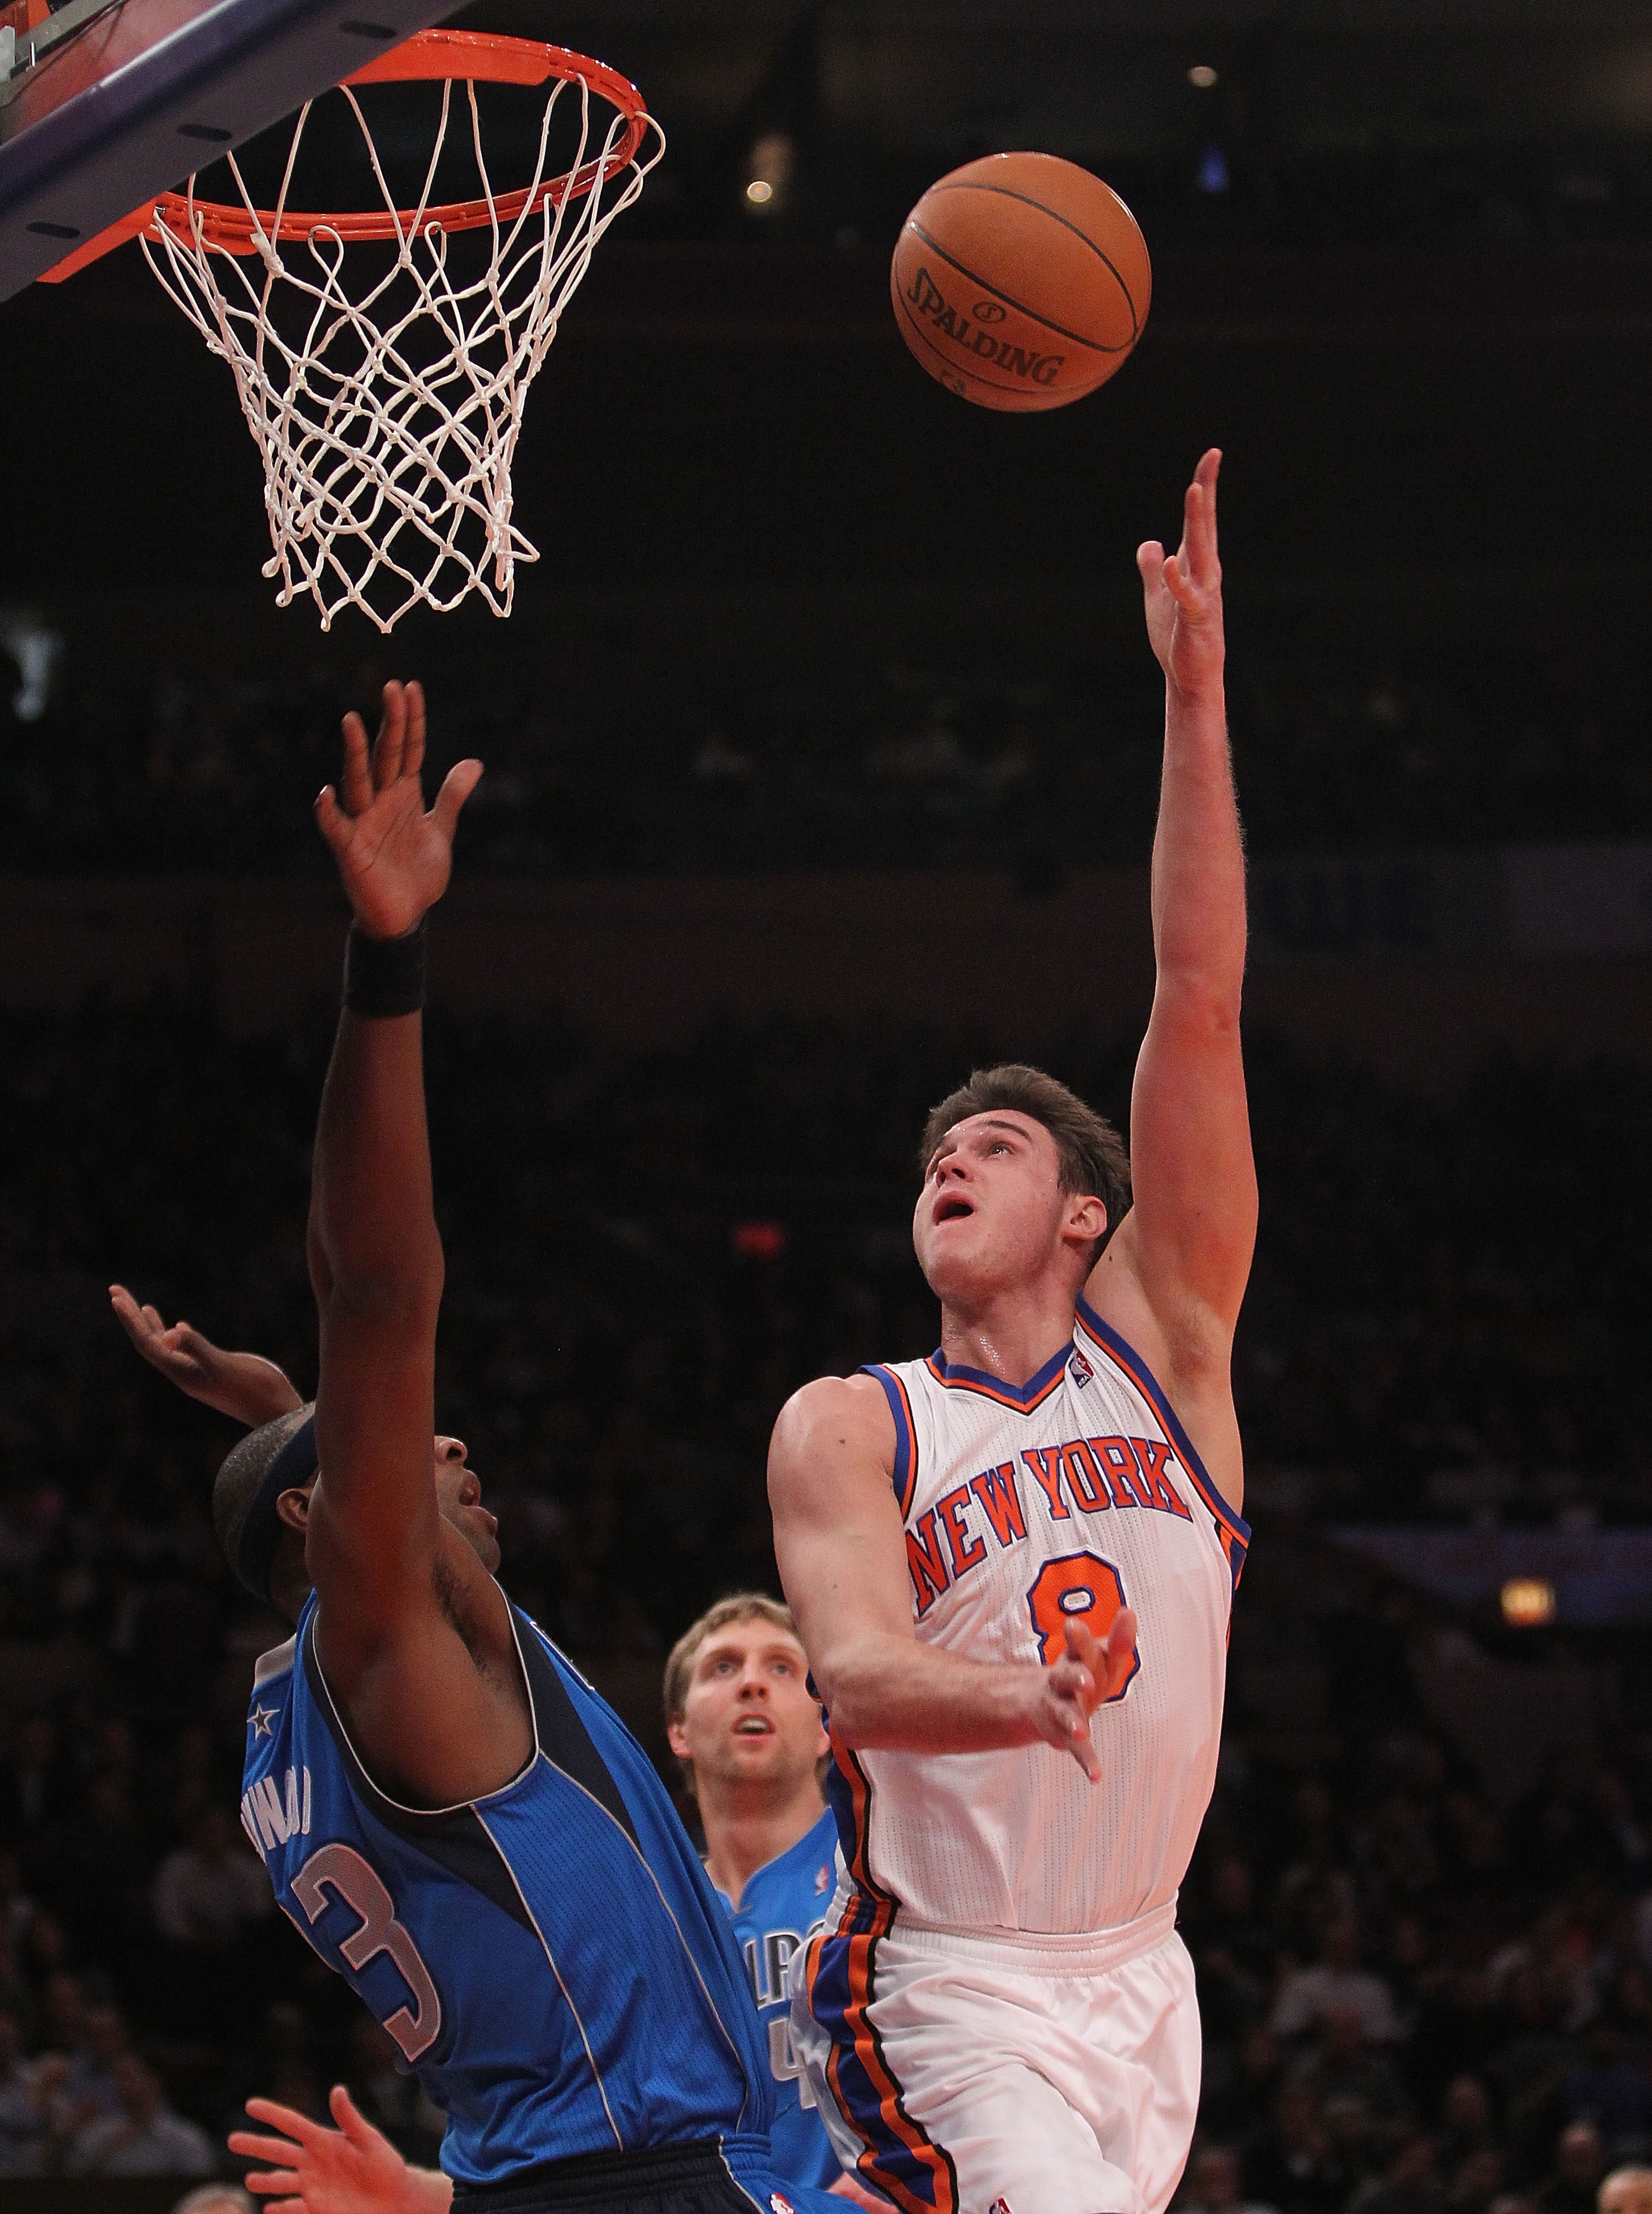 NEW YORK, NY - FEBRUARY 02:  Danilo Gallinari #8 of the New York Knicks shoots the ball over Brendan Haywood #33 of the Dallas Mavericks at Madison Square Garden on February 2, 2011 in New York City. NOTE TO USER: User expressly acknowledges and agrees th